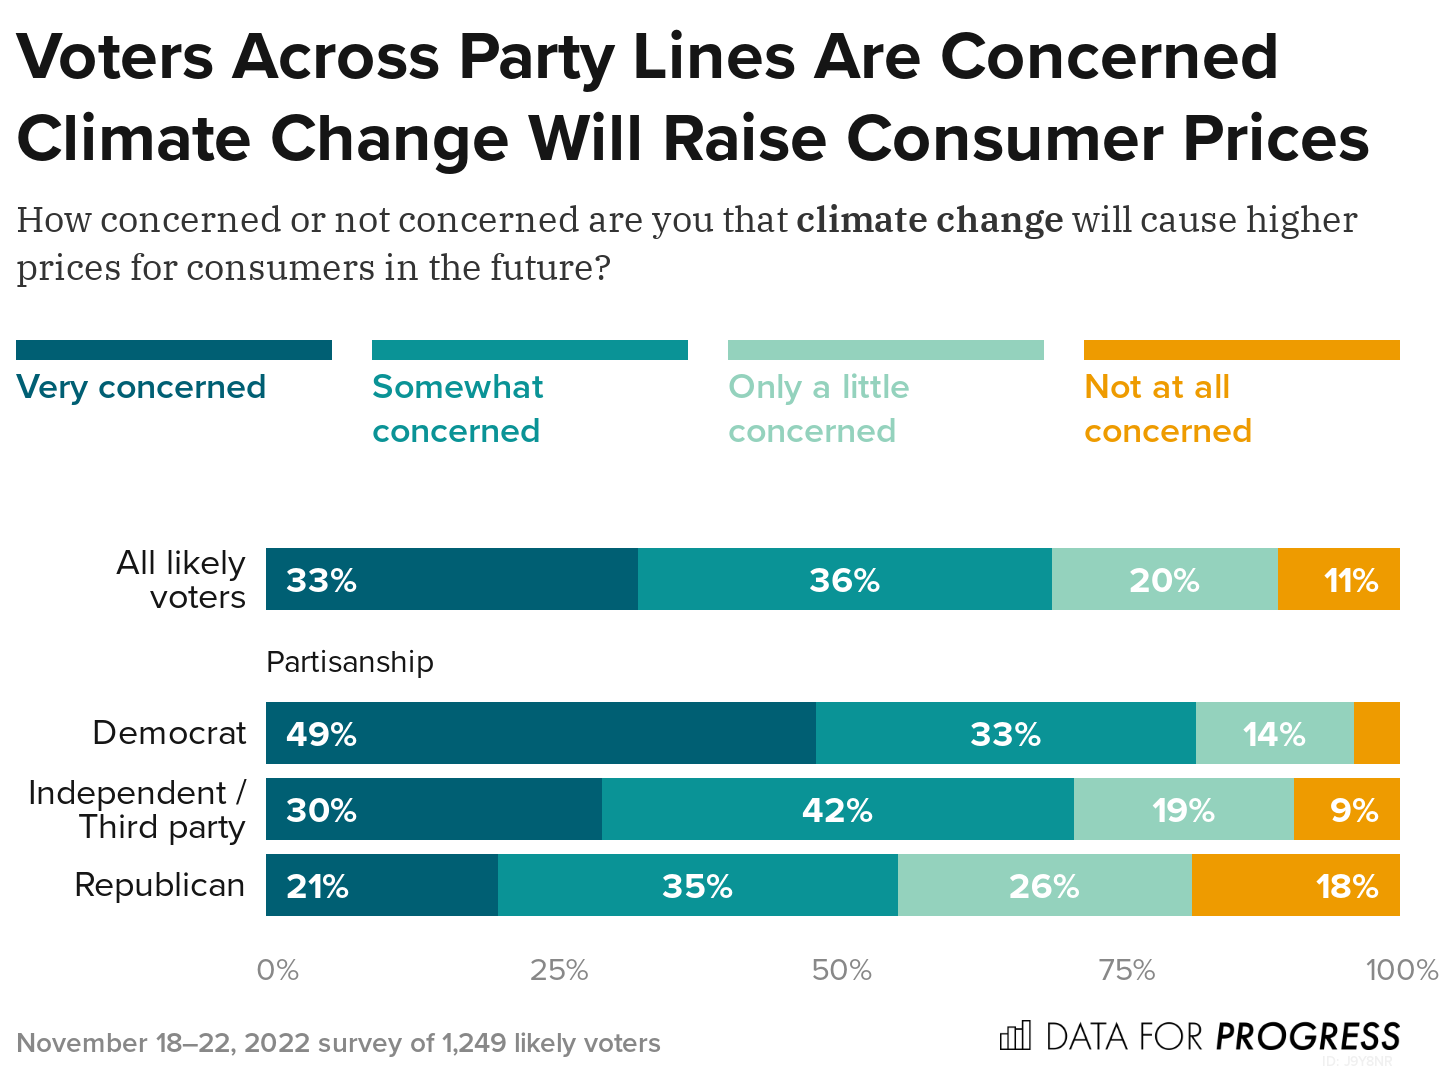 A Majority of Voters Believe Climate Change Will Increase Costs